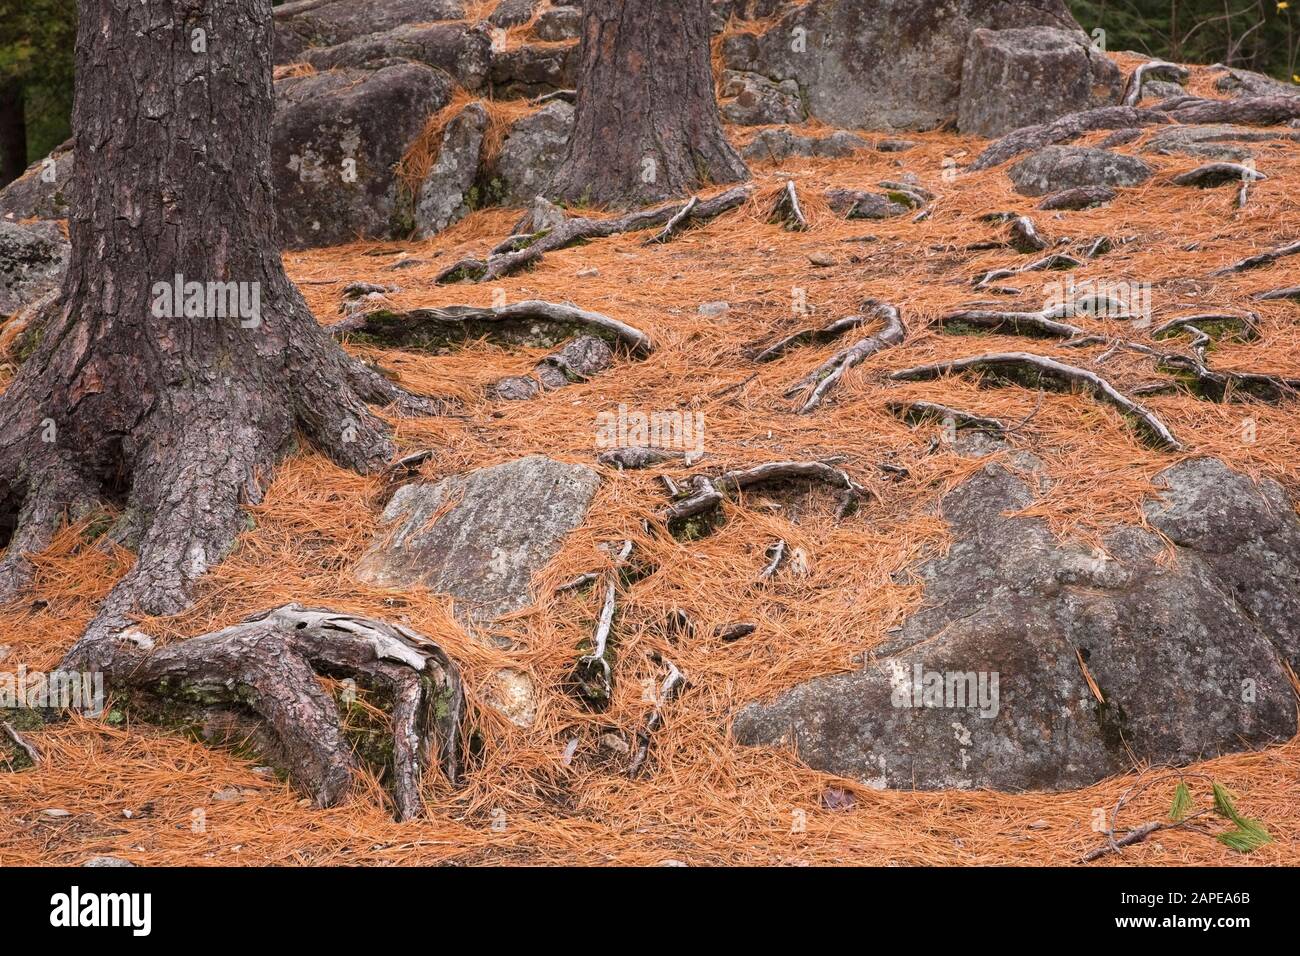 Fallen Pinus resinosa - Pine tree needles and exposed roots and outcrops caused by soil erosion in forest in autumn Stock Photo